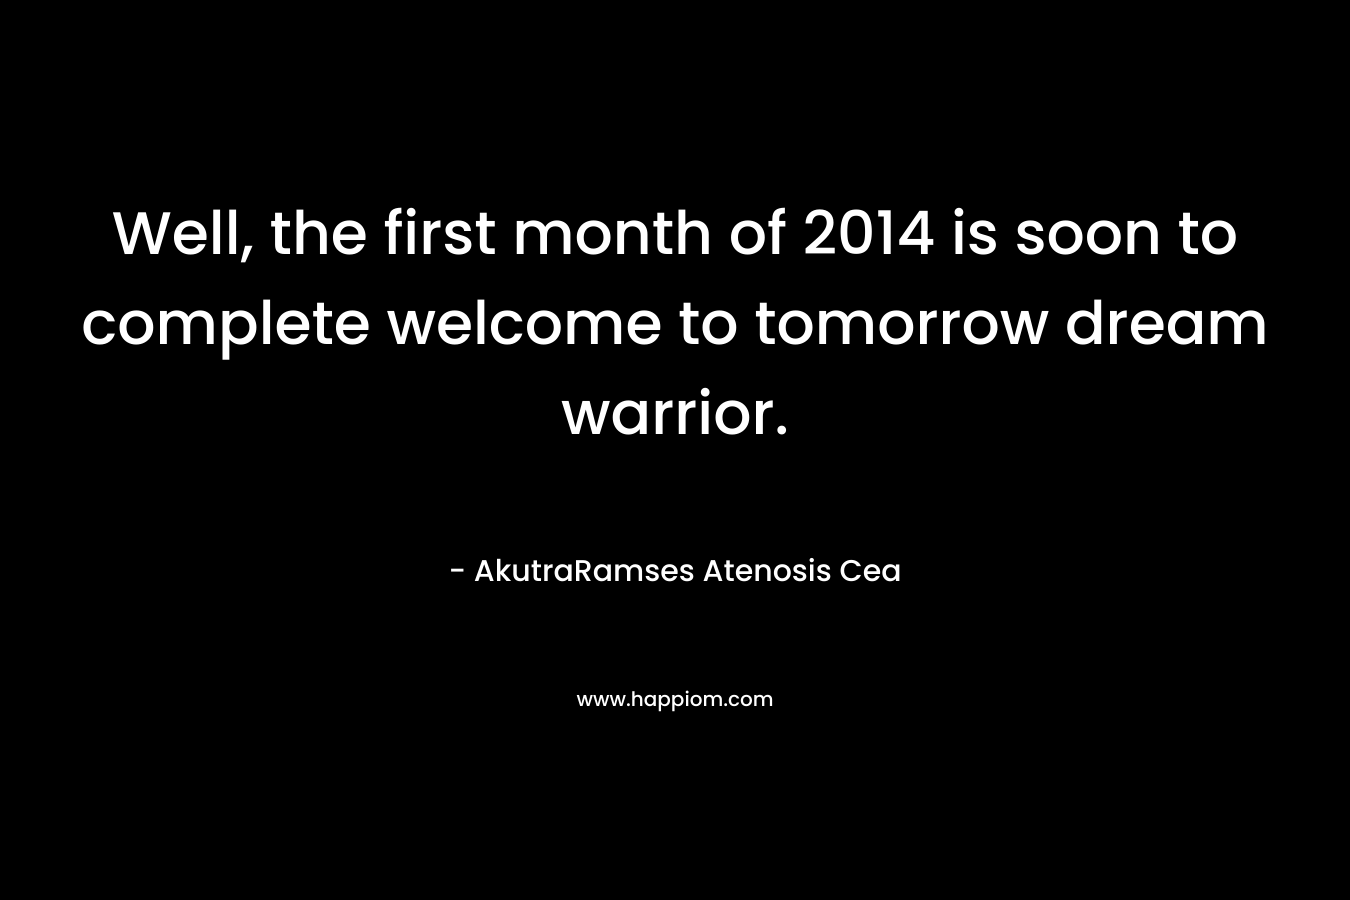 Well, the first month of 2014 is soon to complete welcome to tomorrow dream warrior.